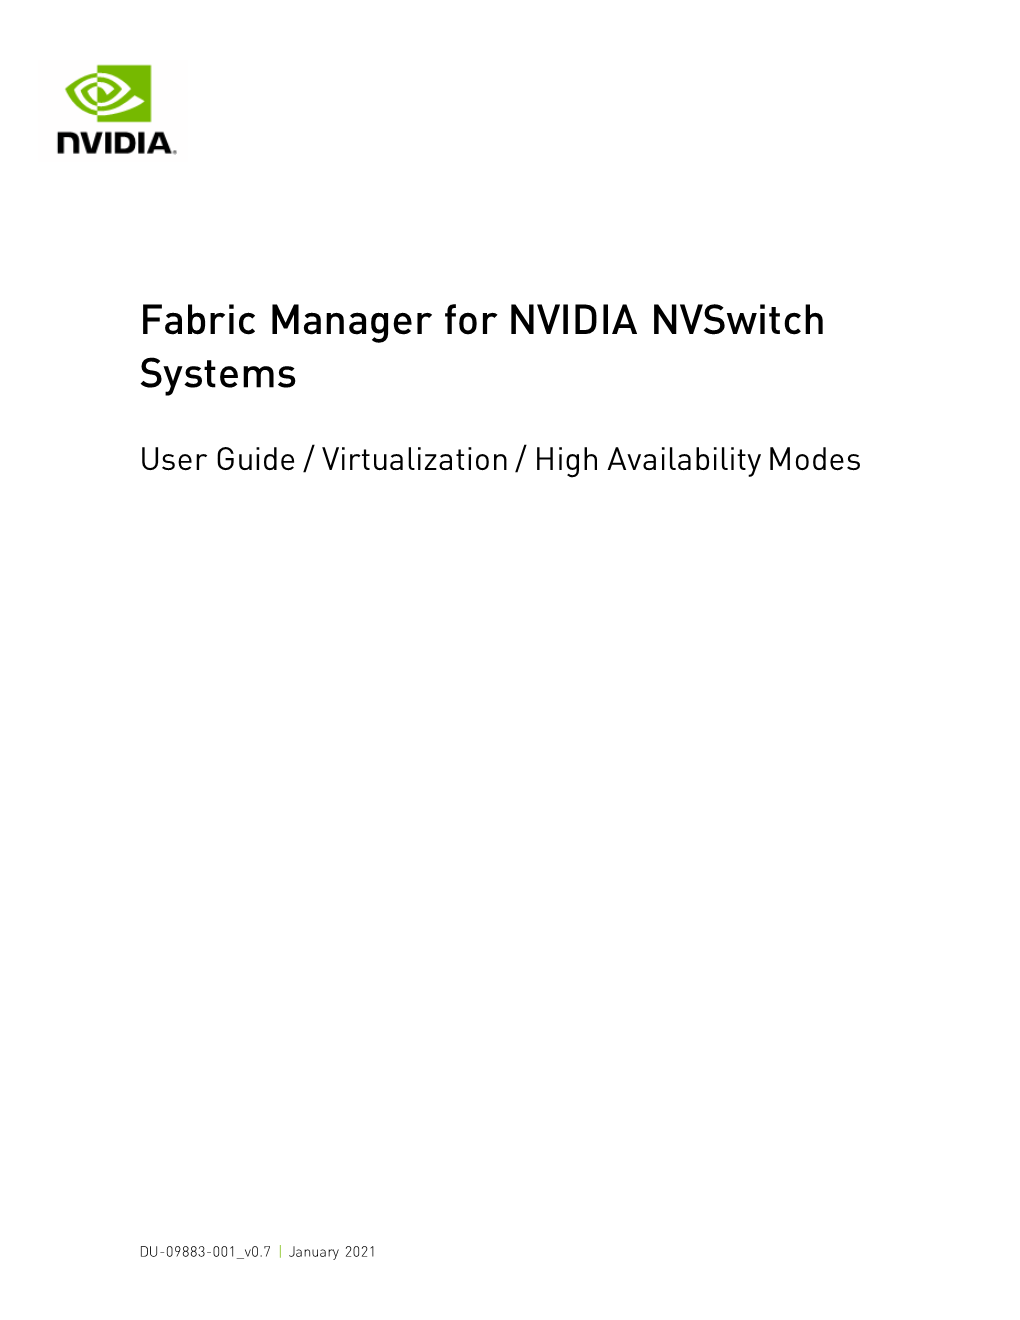 Fabric Manager for NVIDIA Nvswitch Systems